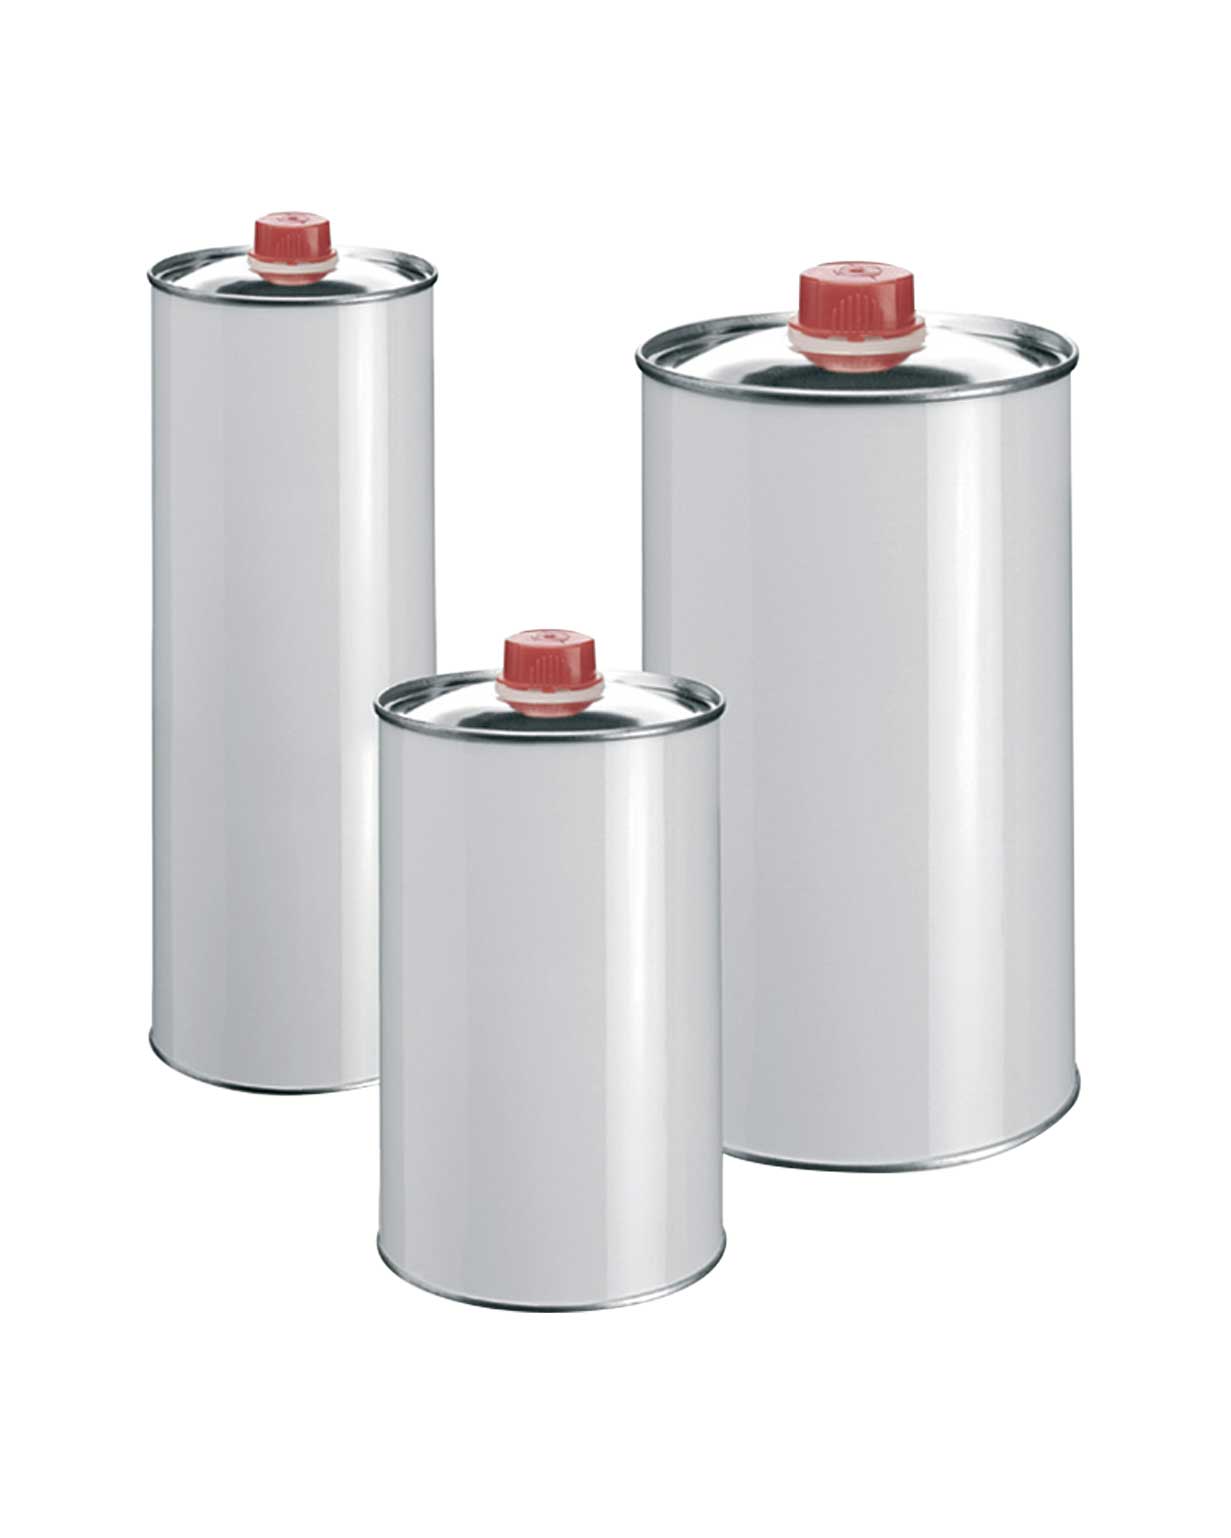 Cylindrical Cans - Paramount Global